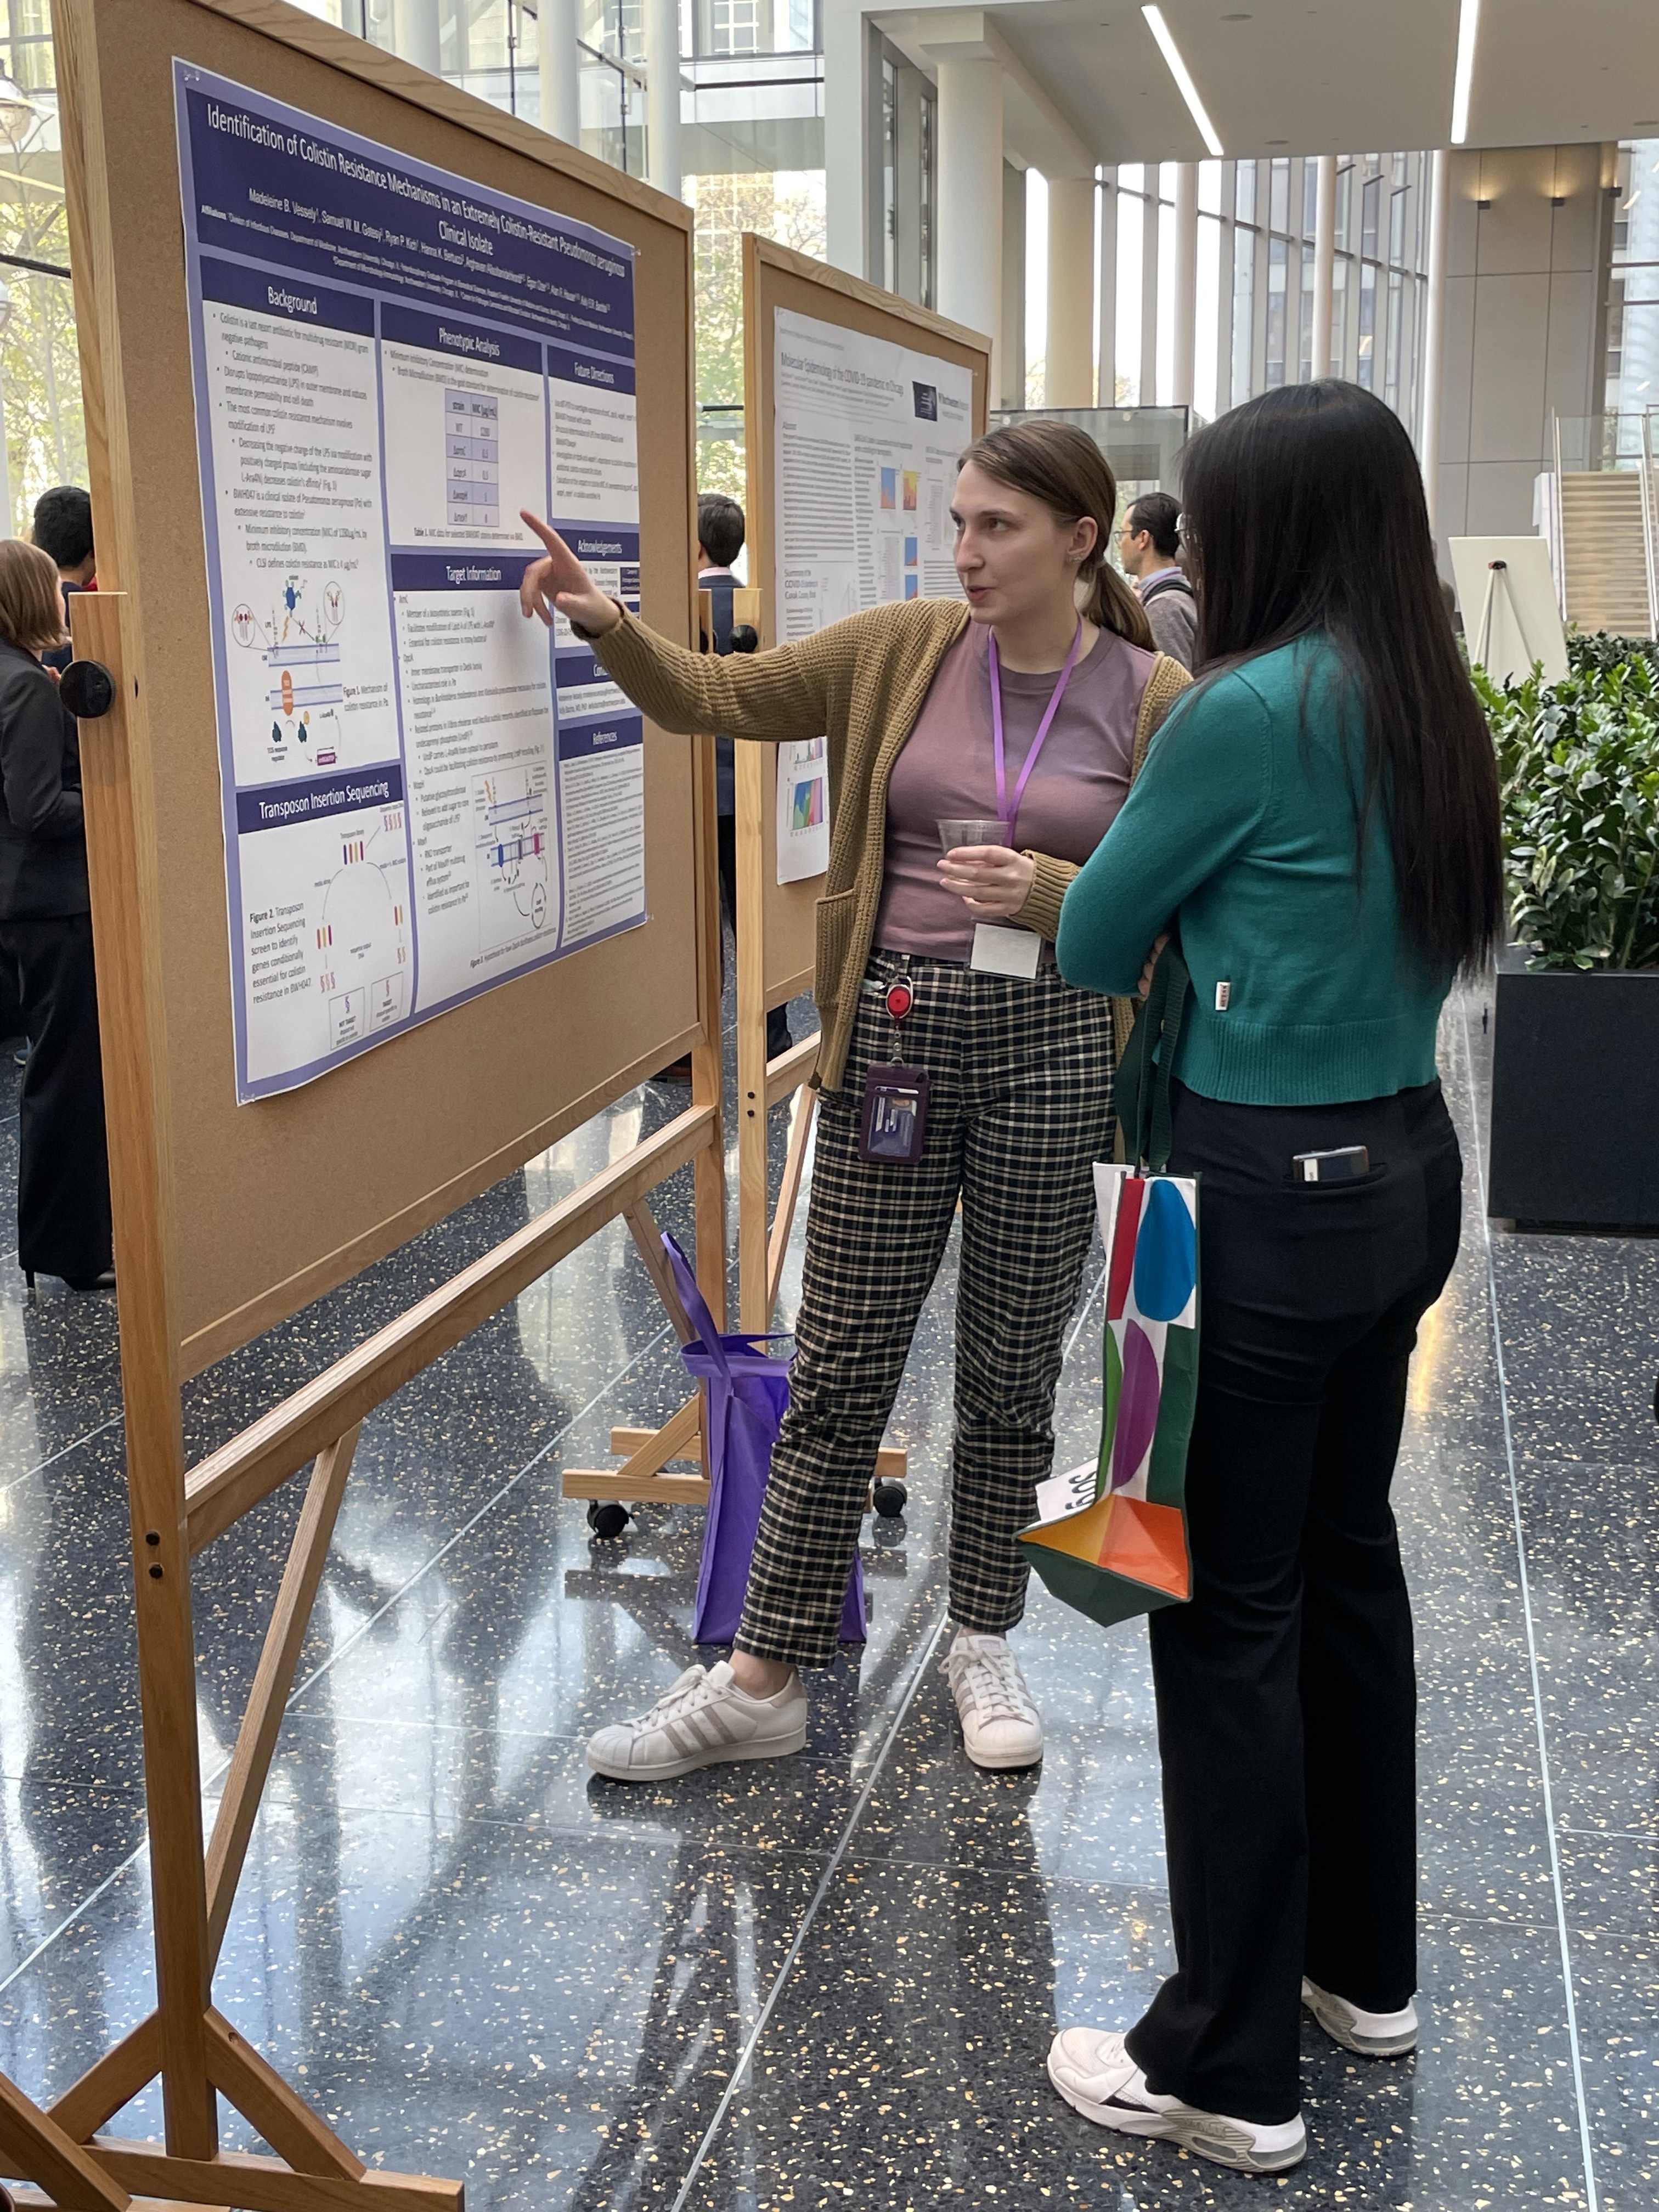 Symposium participant presenting their poster to an attendee